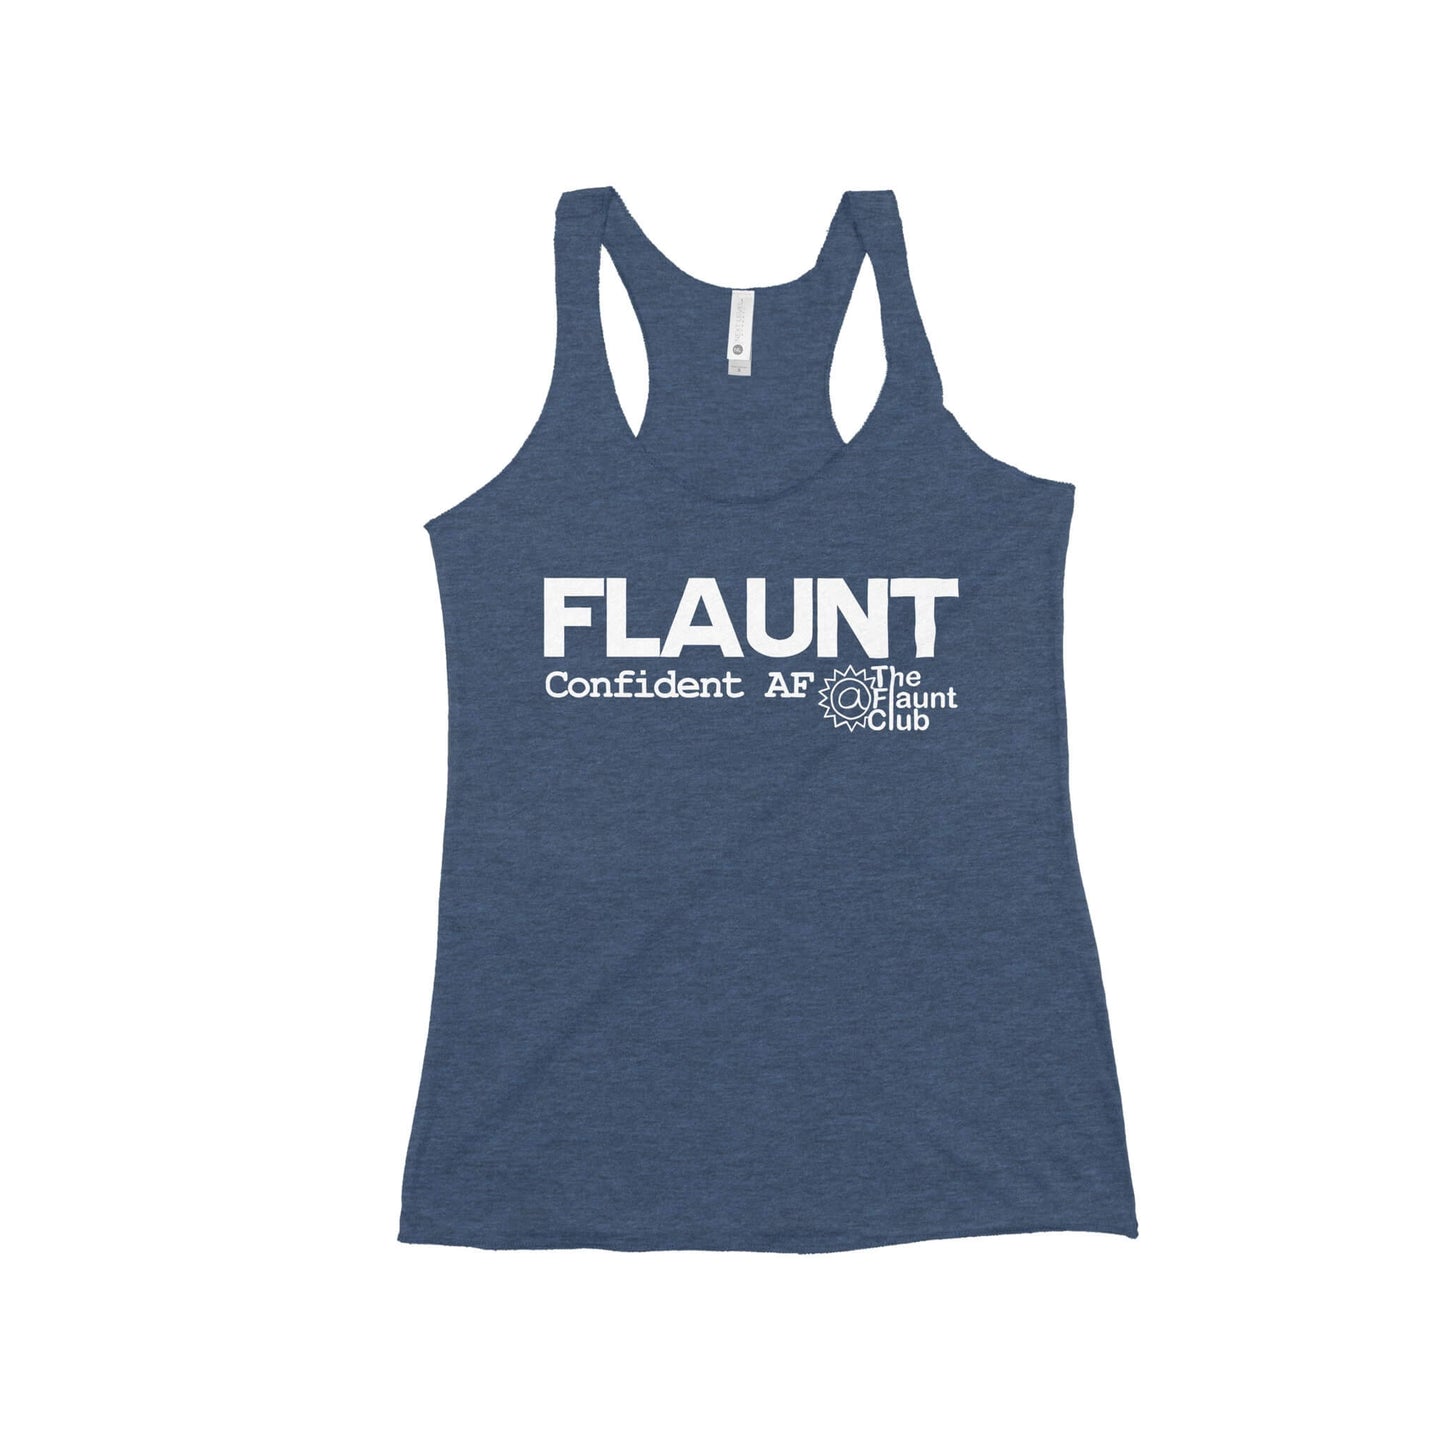 Flaunt (Solid) Women's Racerback Tank Top from East Coast AF Apparel